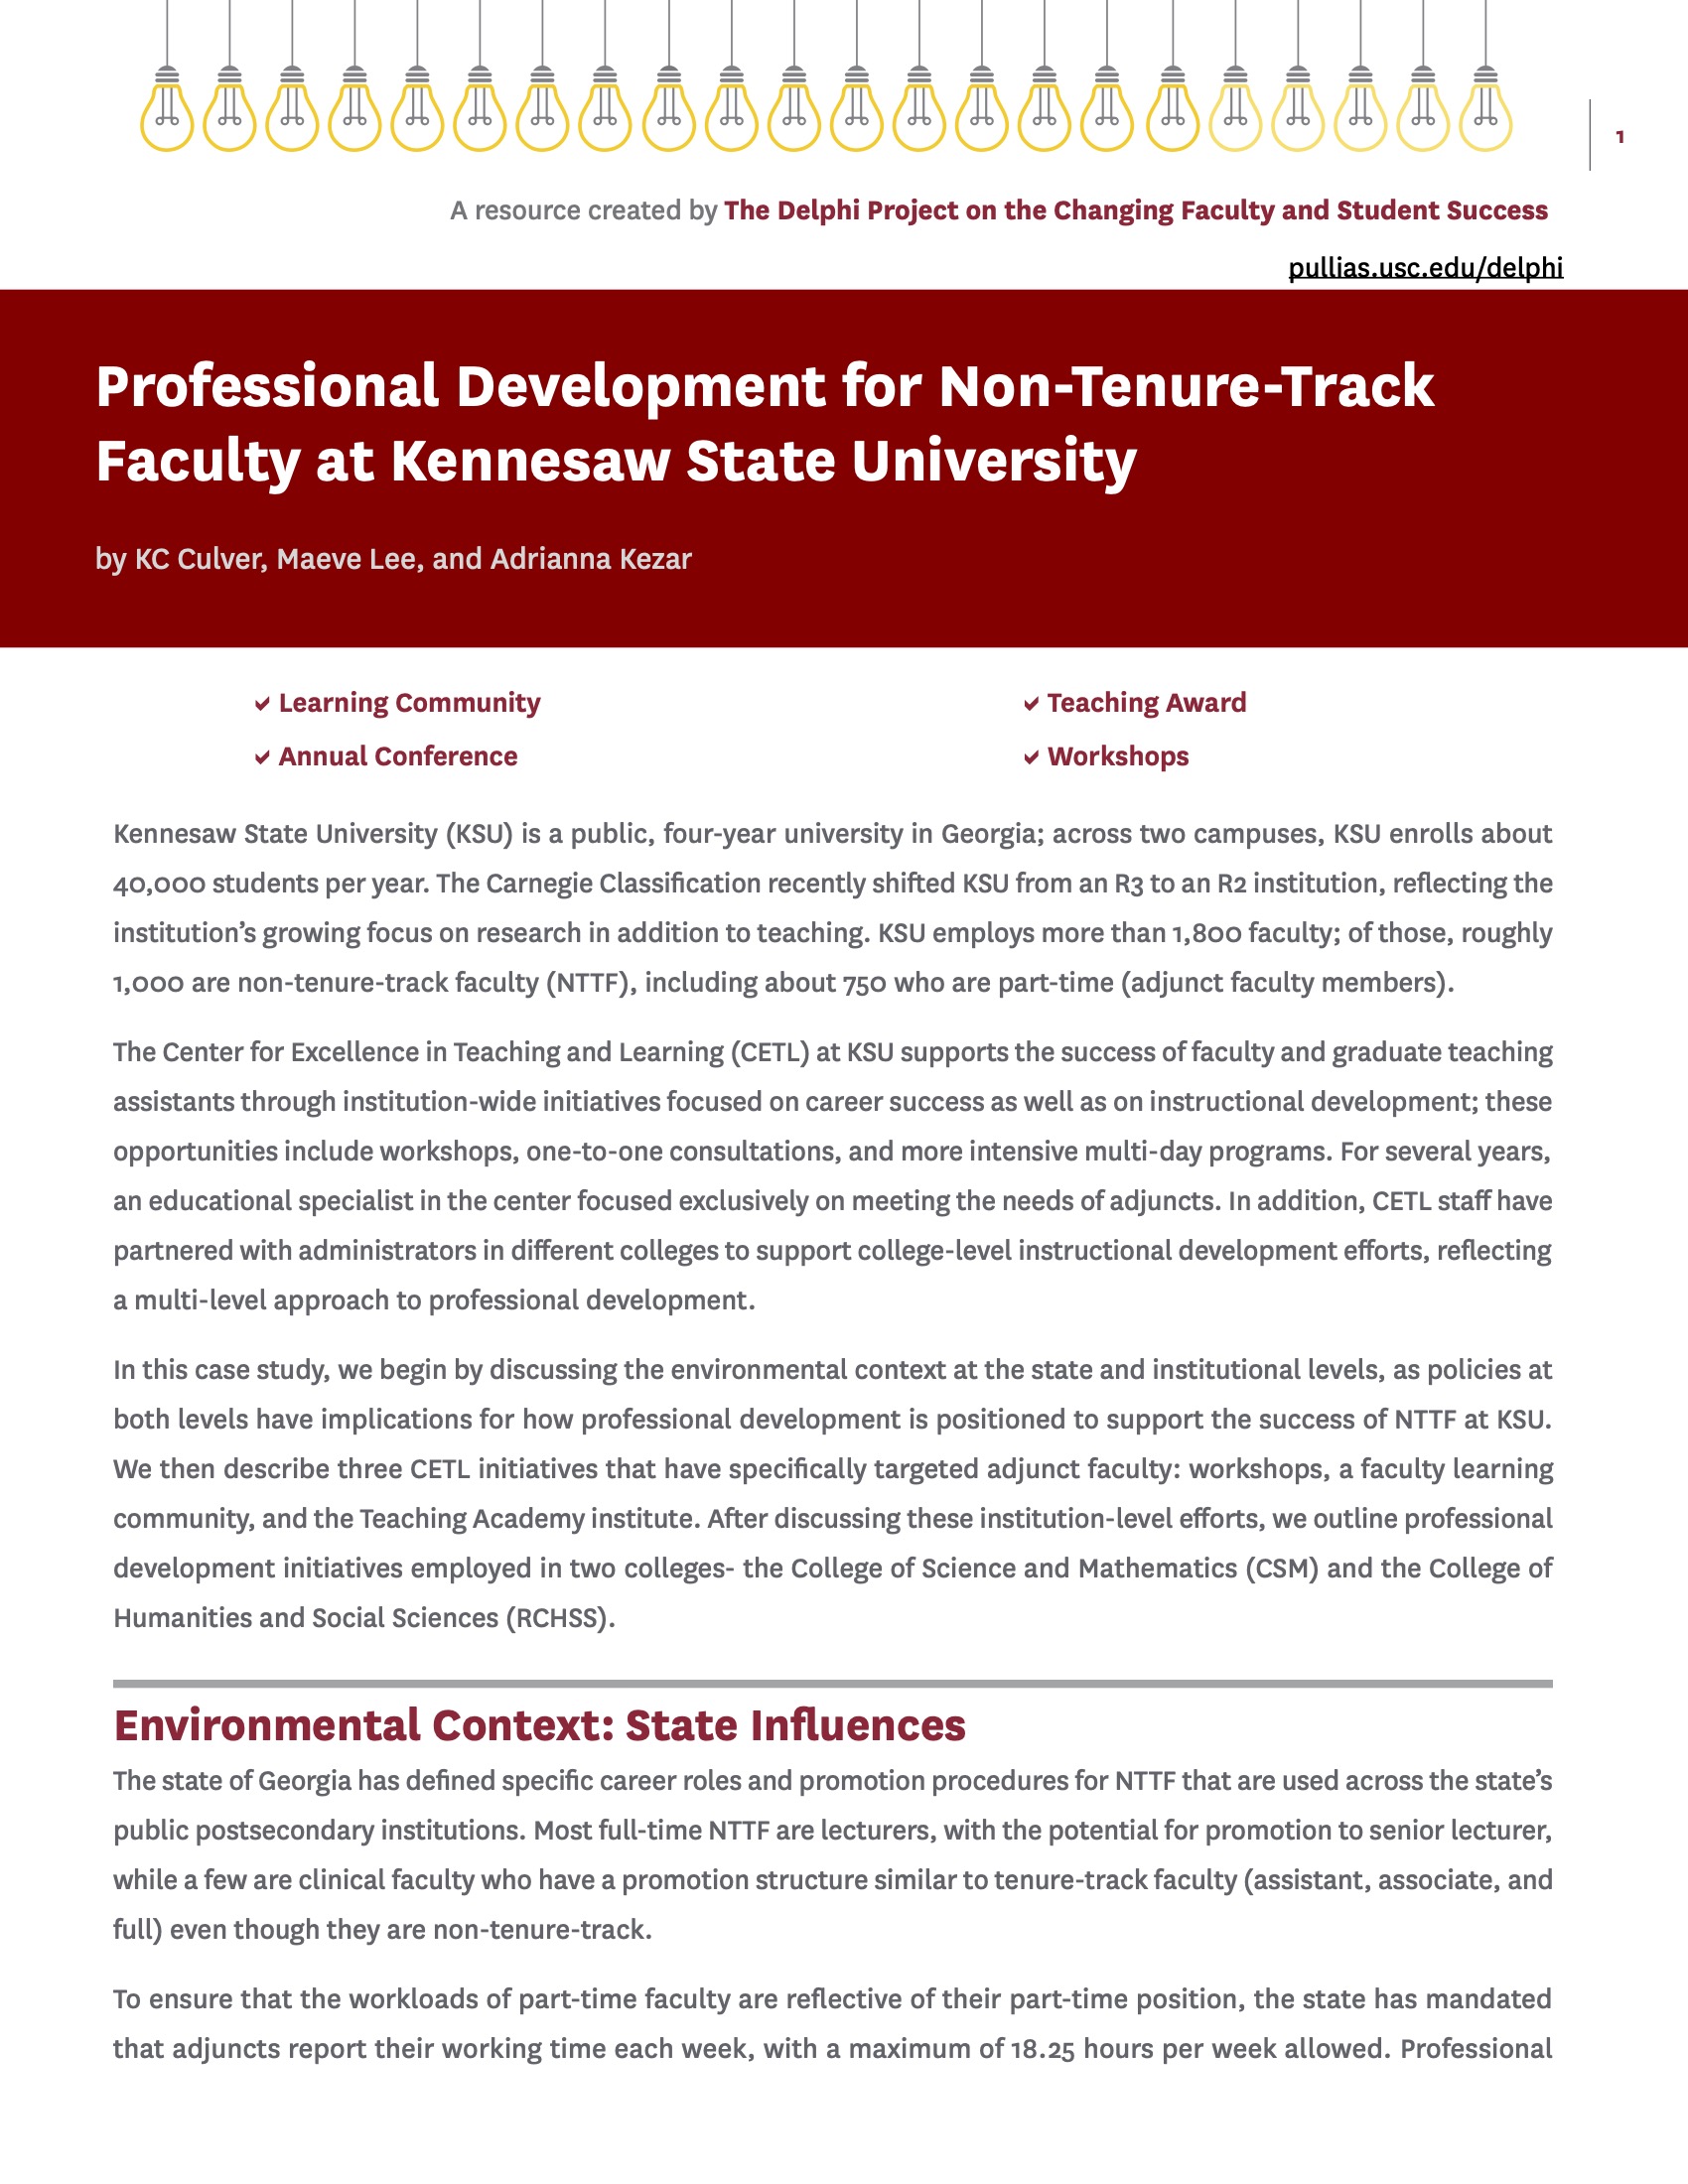 Professional Development for Non-Tenure-Track Faculty at Kennesaw State University